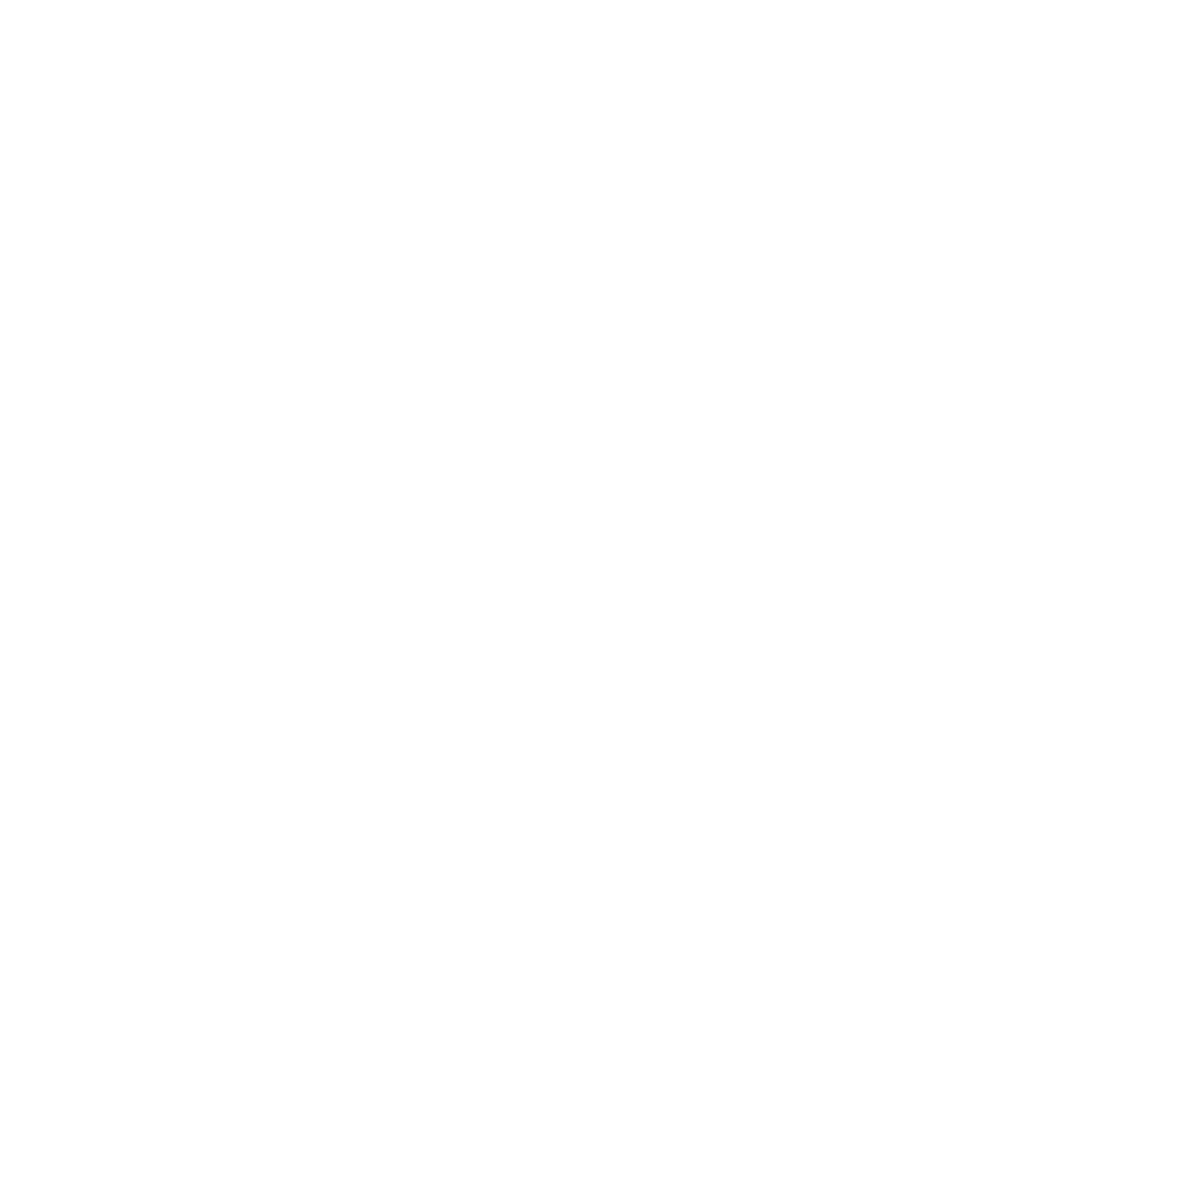 Hate skype? Like chatroom enviroments? Join discord today!